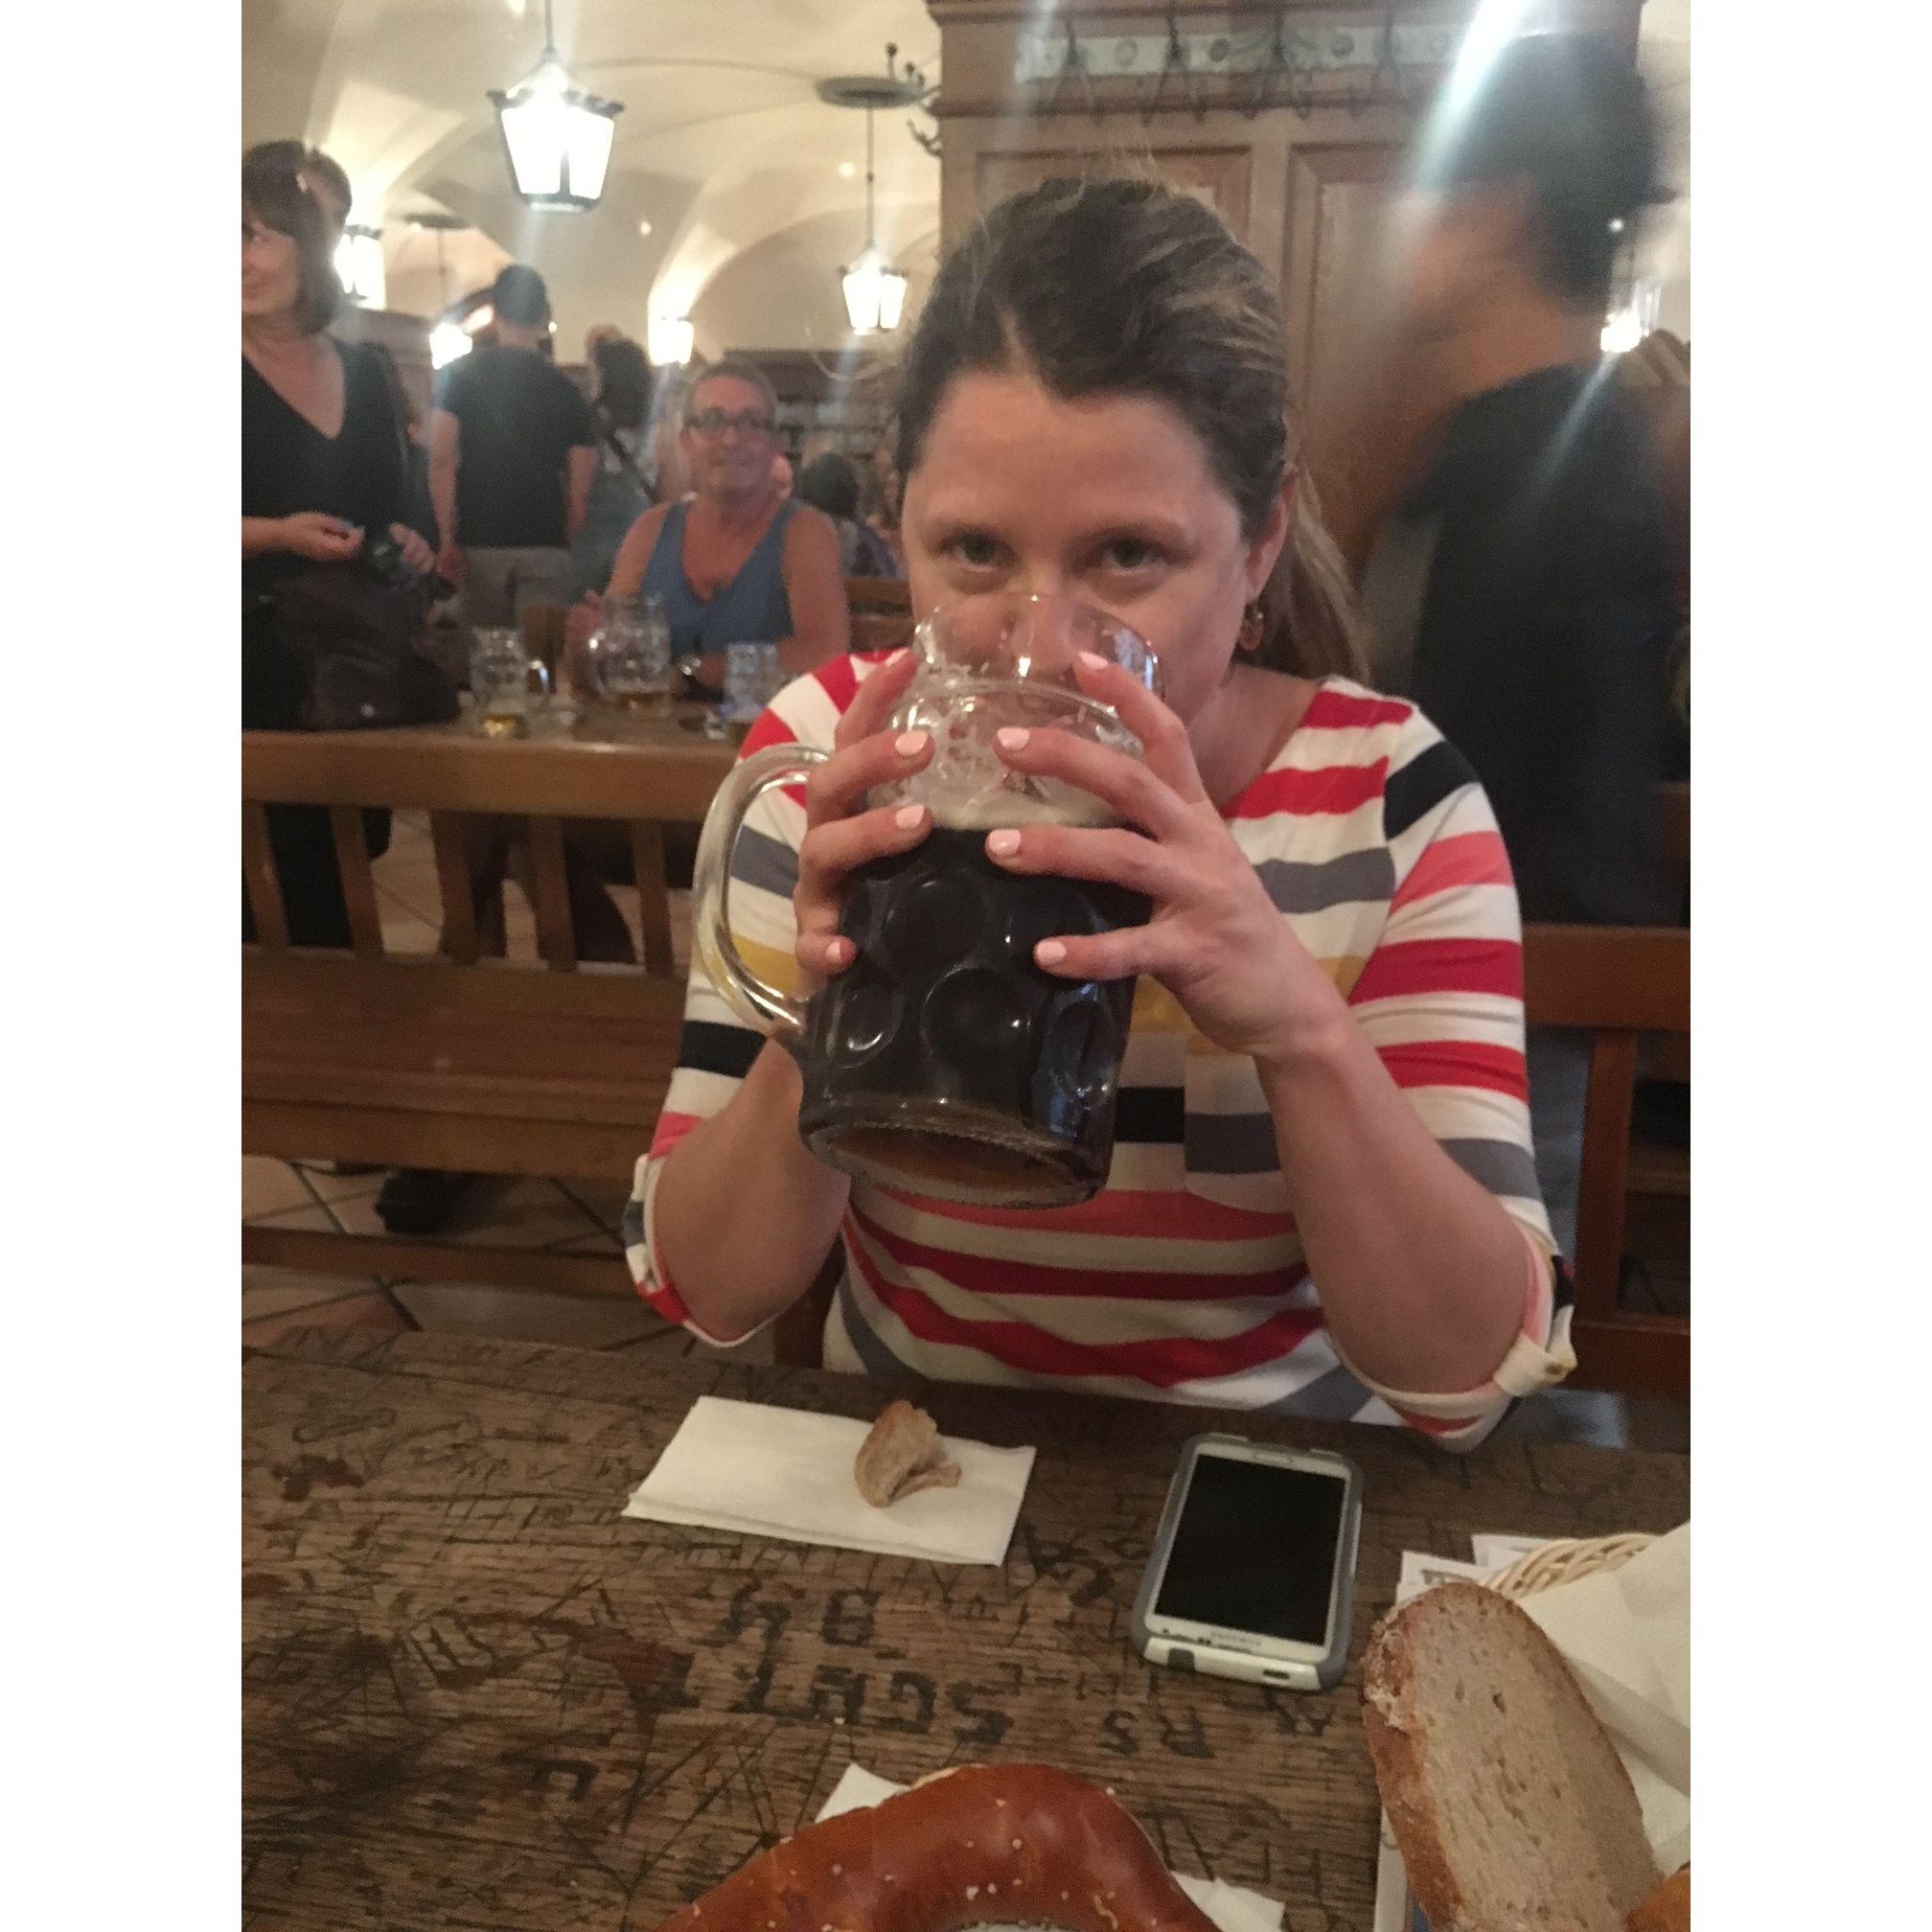 Dinner time in Germany at the Hofbräuhaus.  Giant beers and amazing hot pretzels served by waitresses wearing lederhosen.